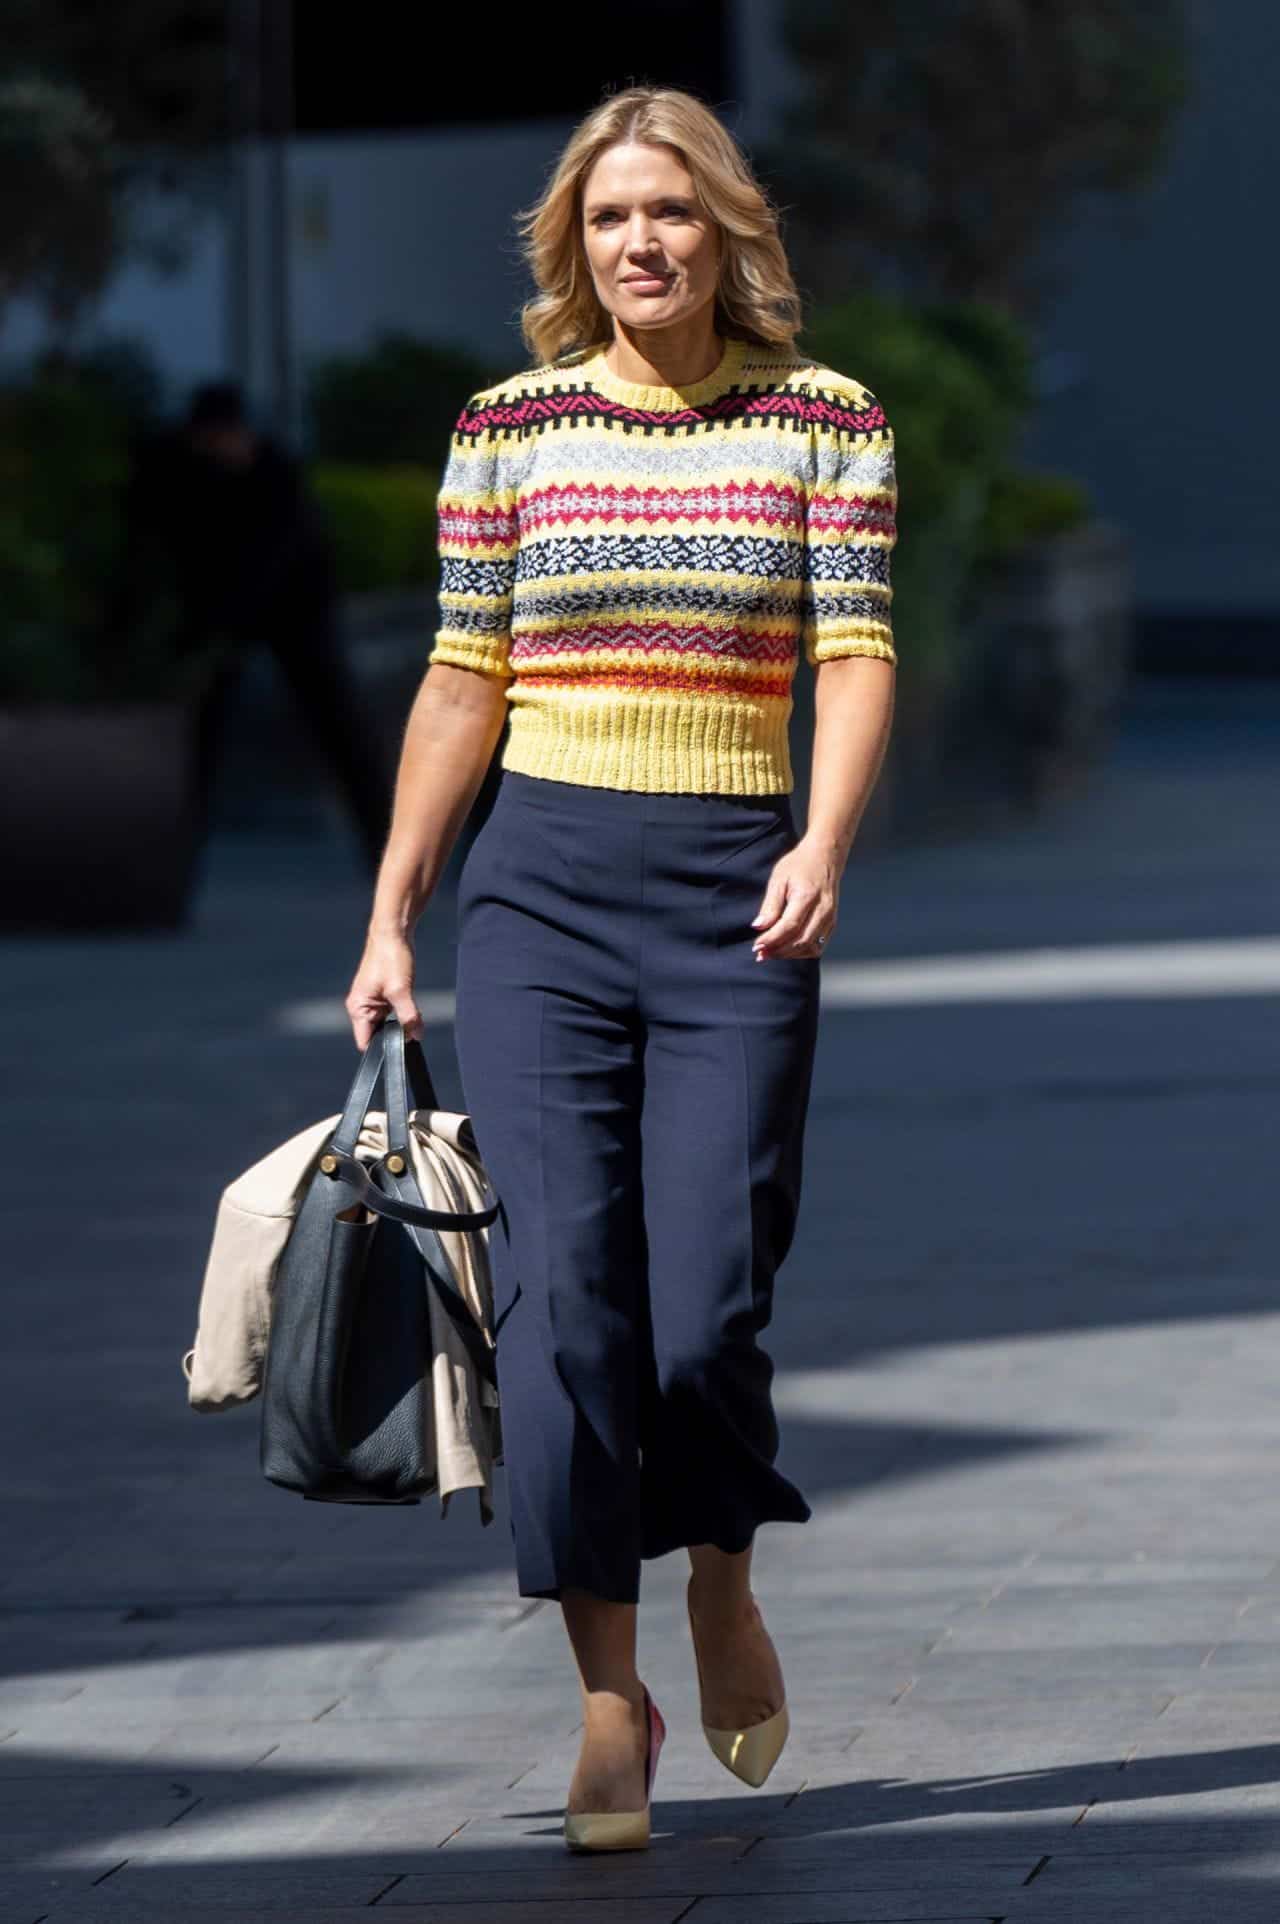 charlotte hawkins in colorful sweater enjoys a casual stroll 1